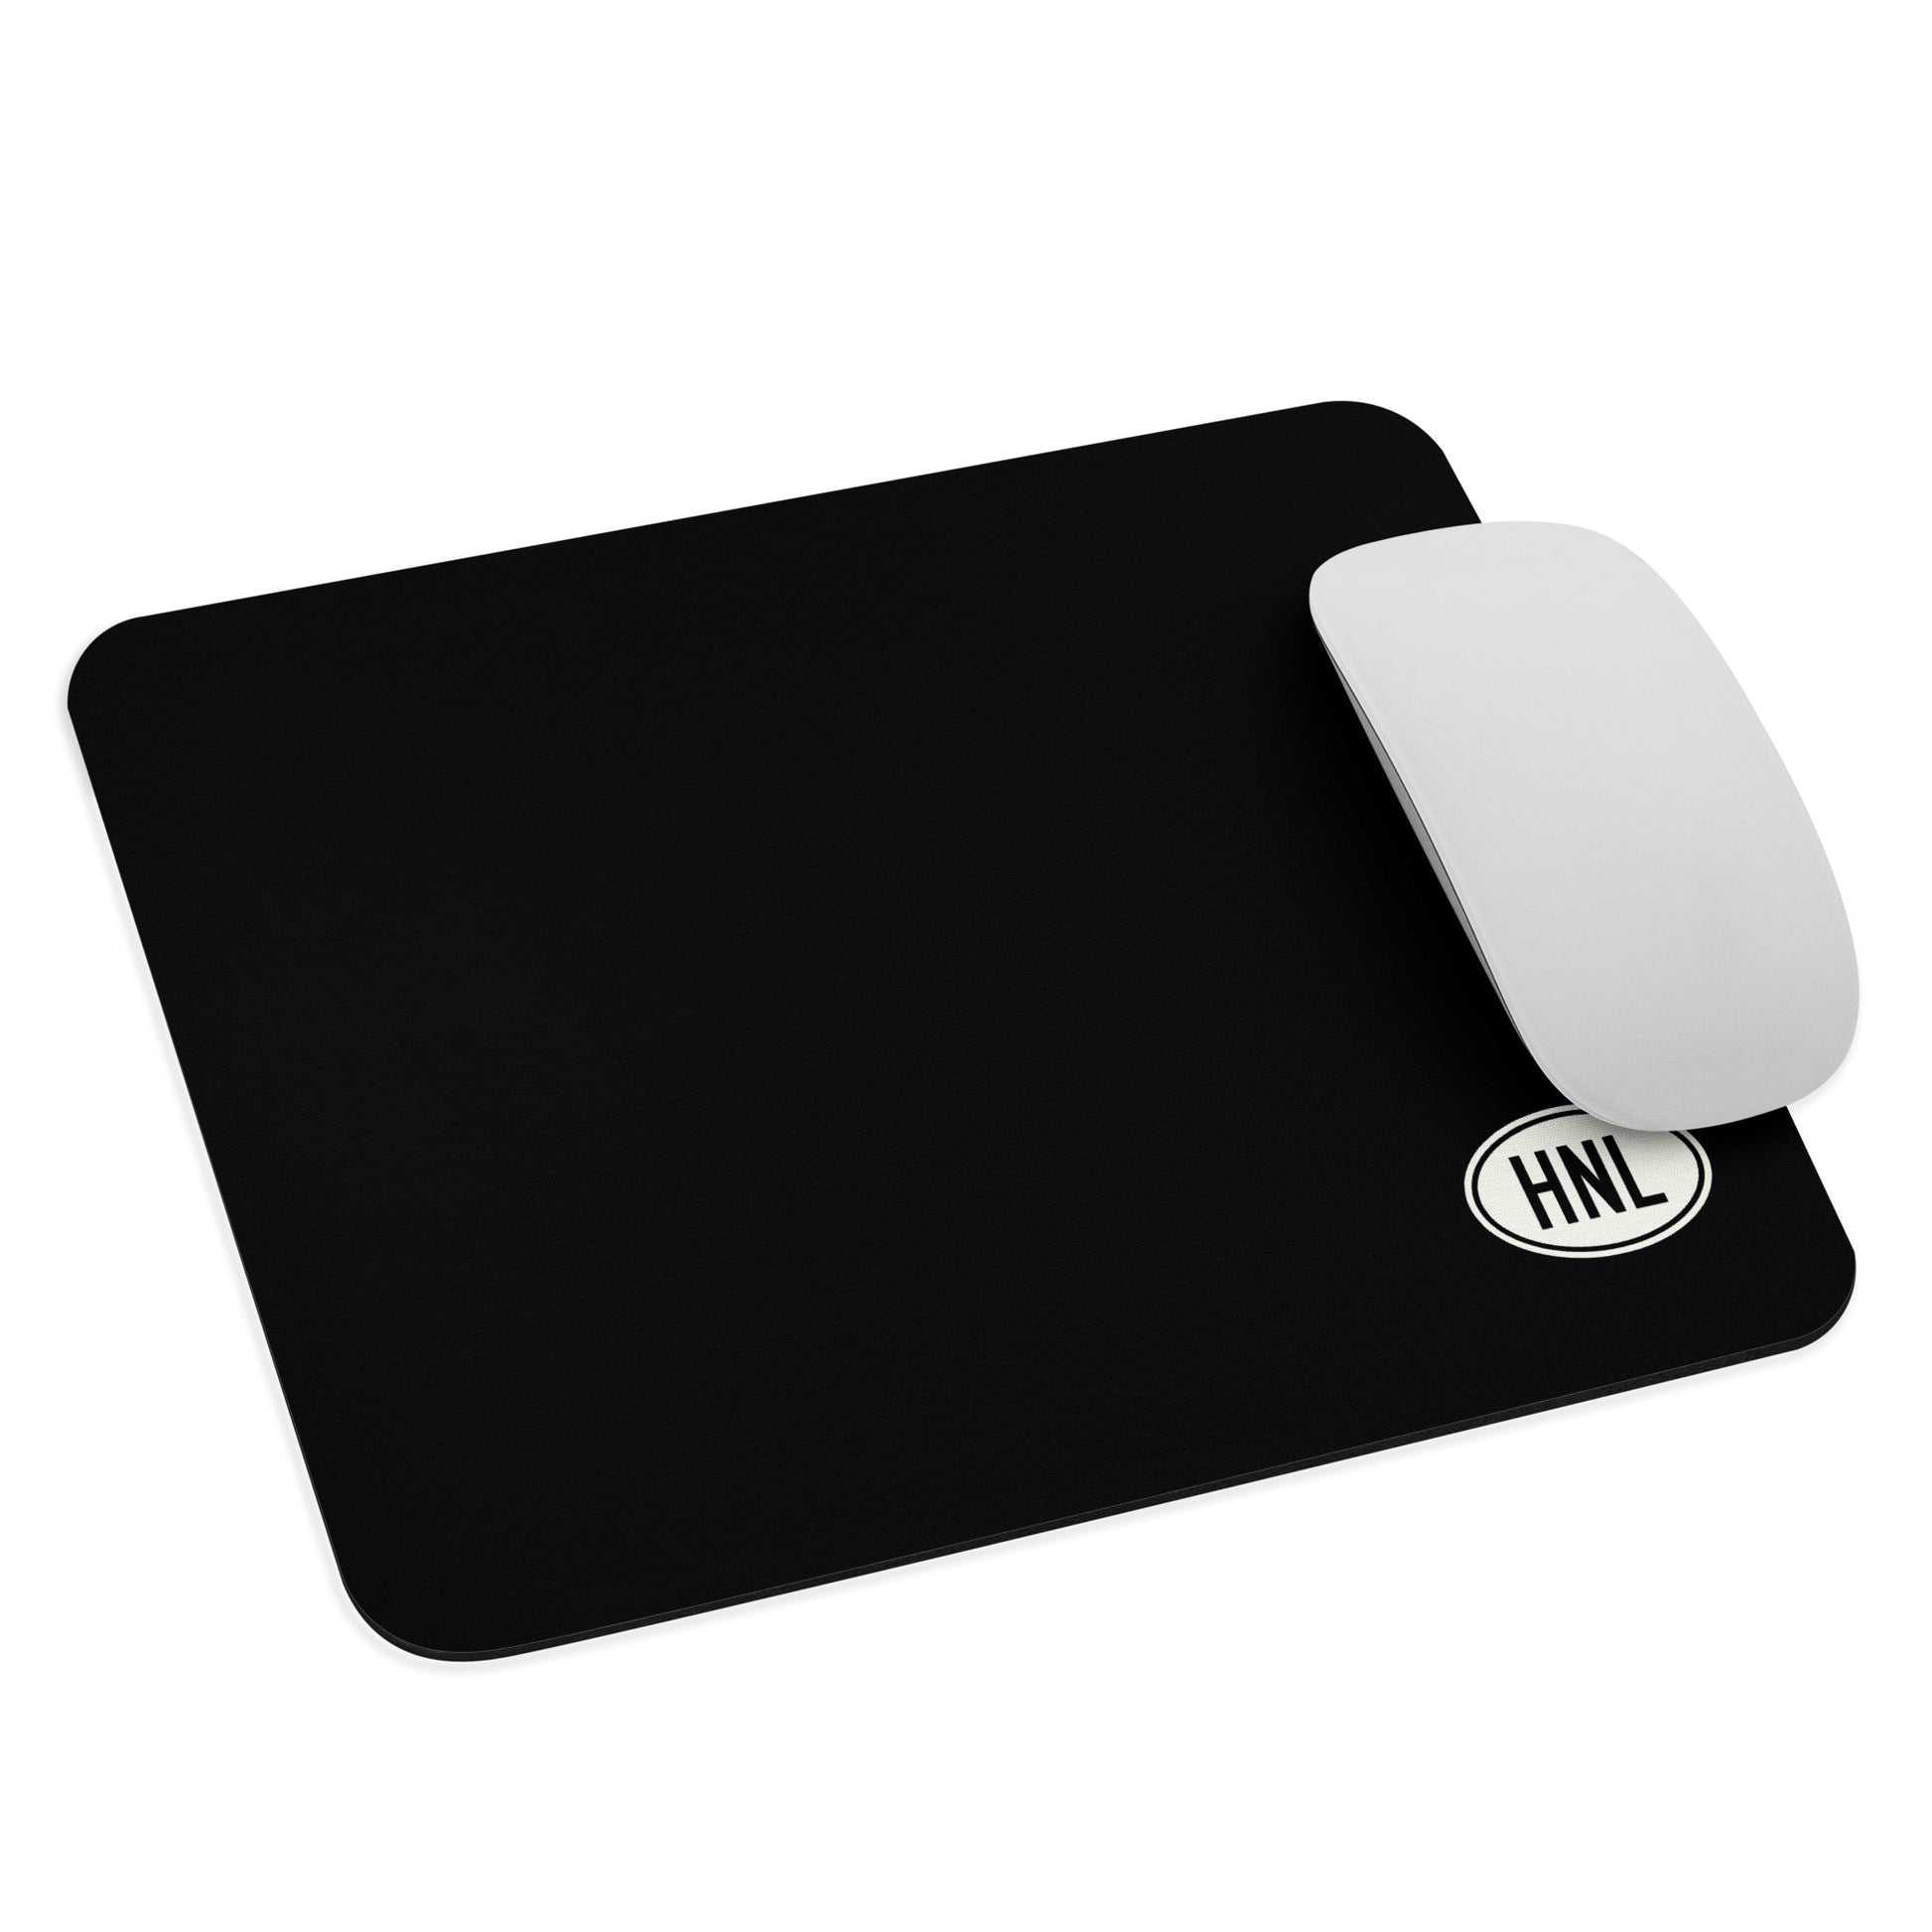 Unique Travel Gift Mouse Pad - White Oval • HNL Honolulu • YHM Designs - Image 03